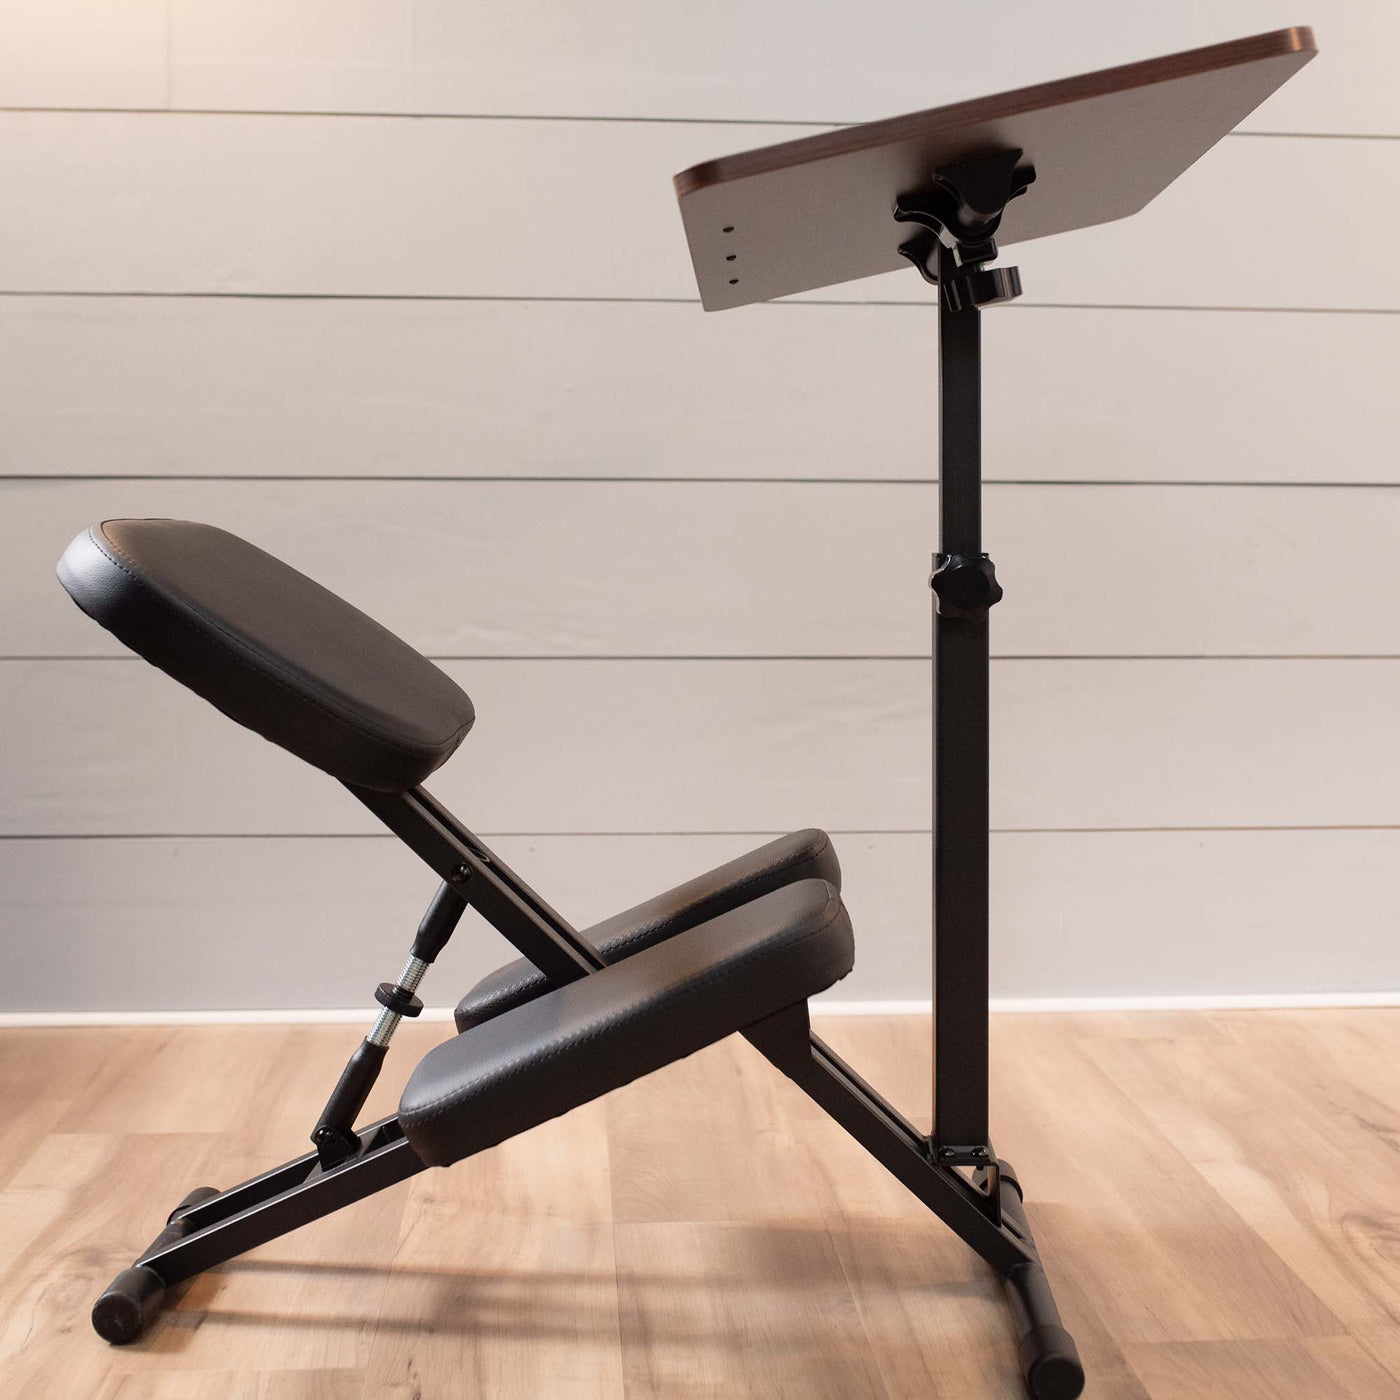 Comfortable kneeling chair desk for tension relief and posture.